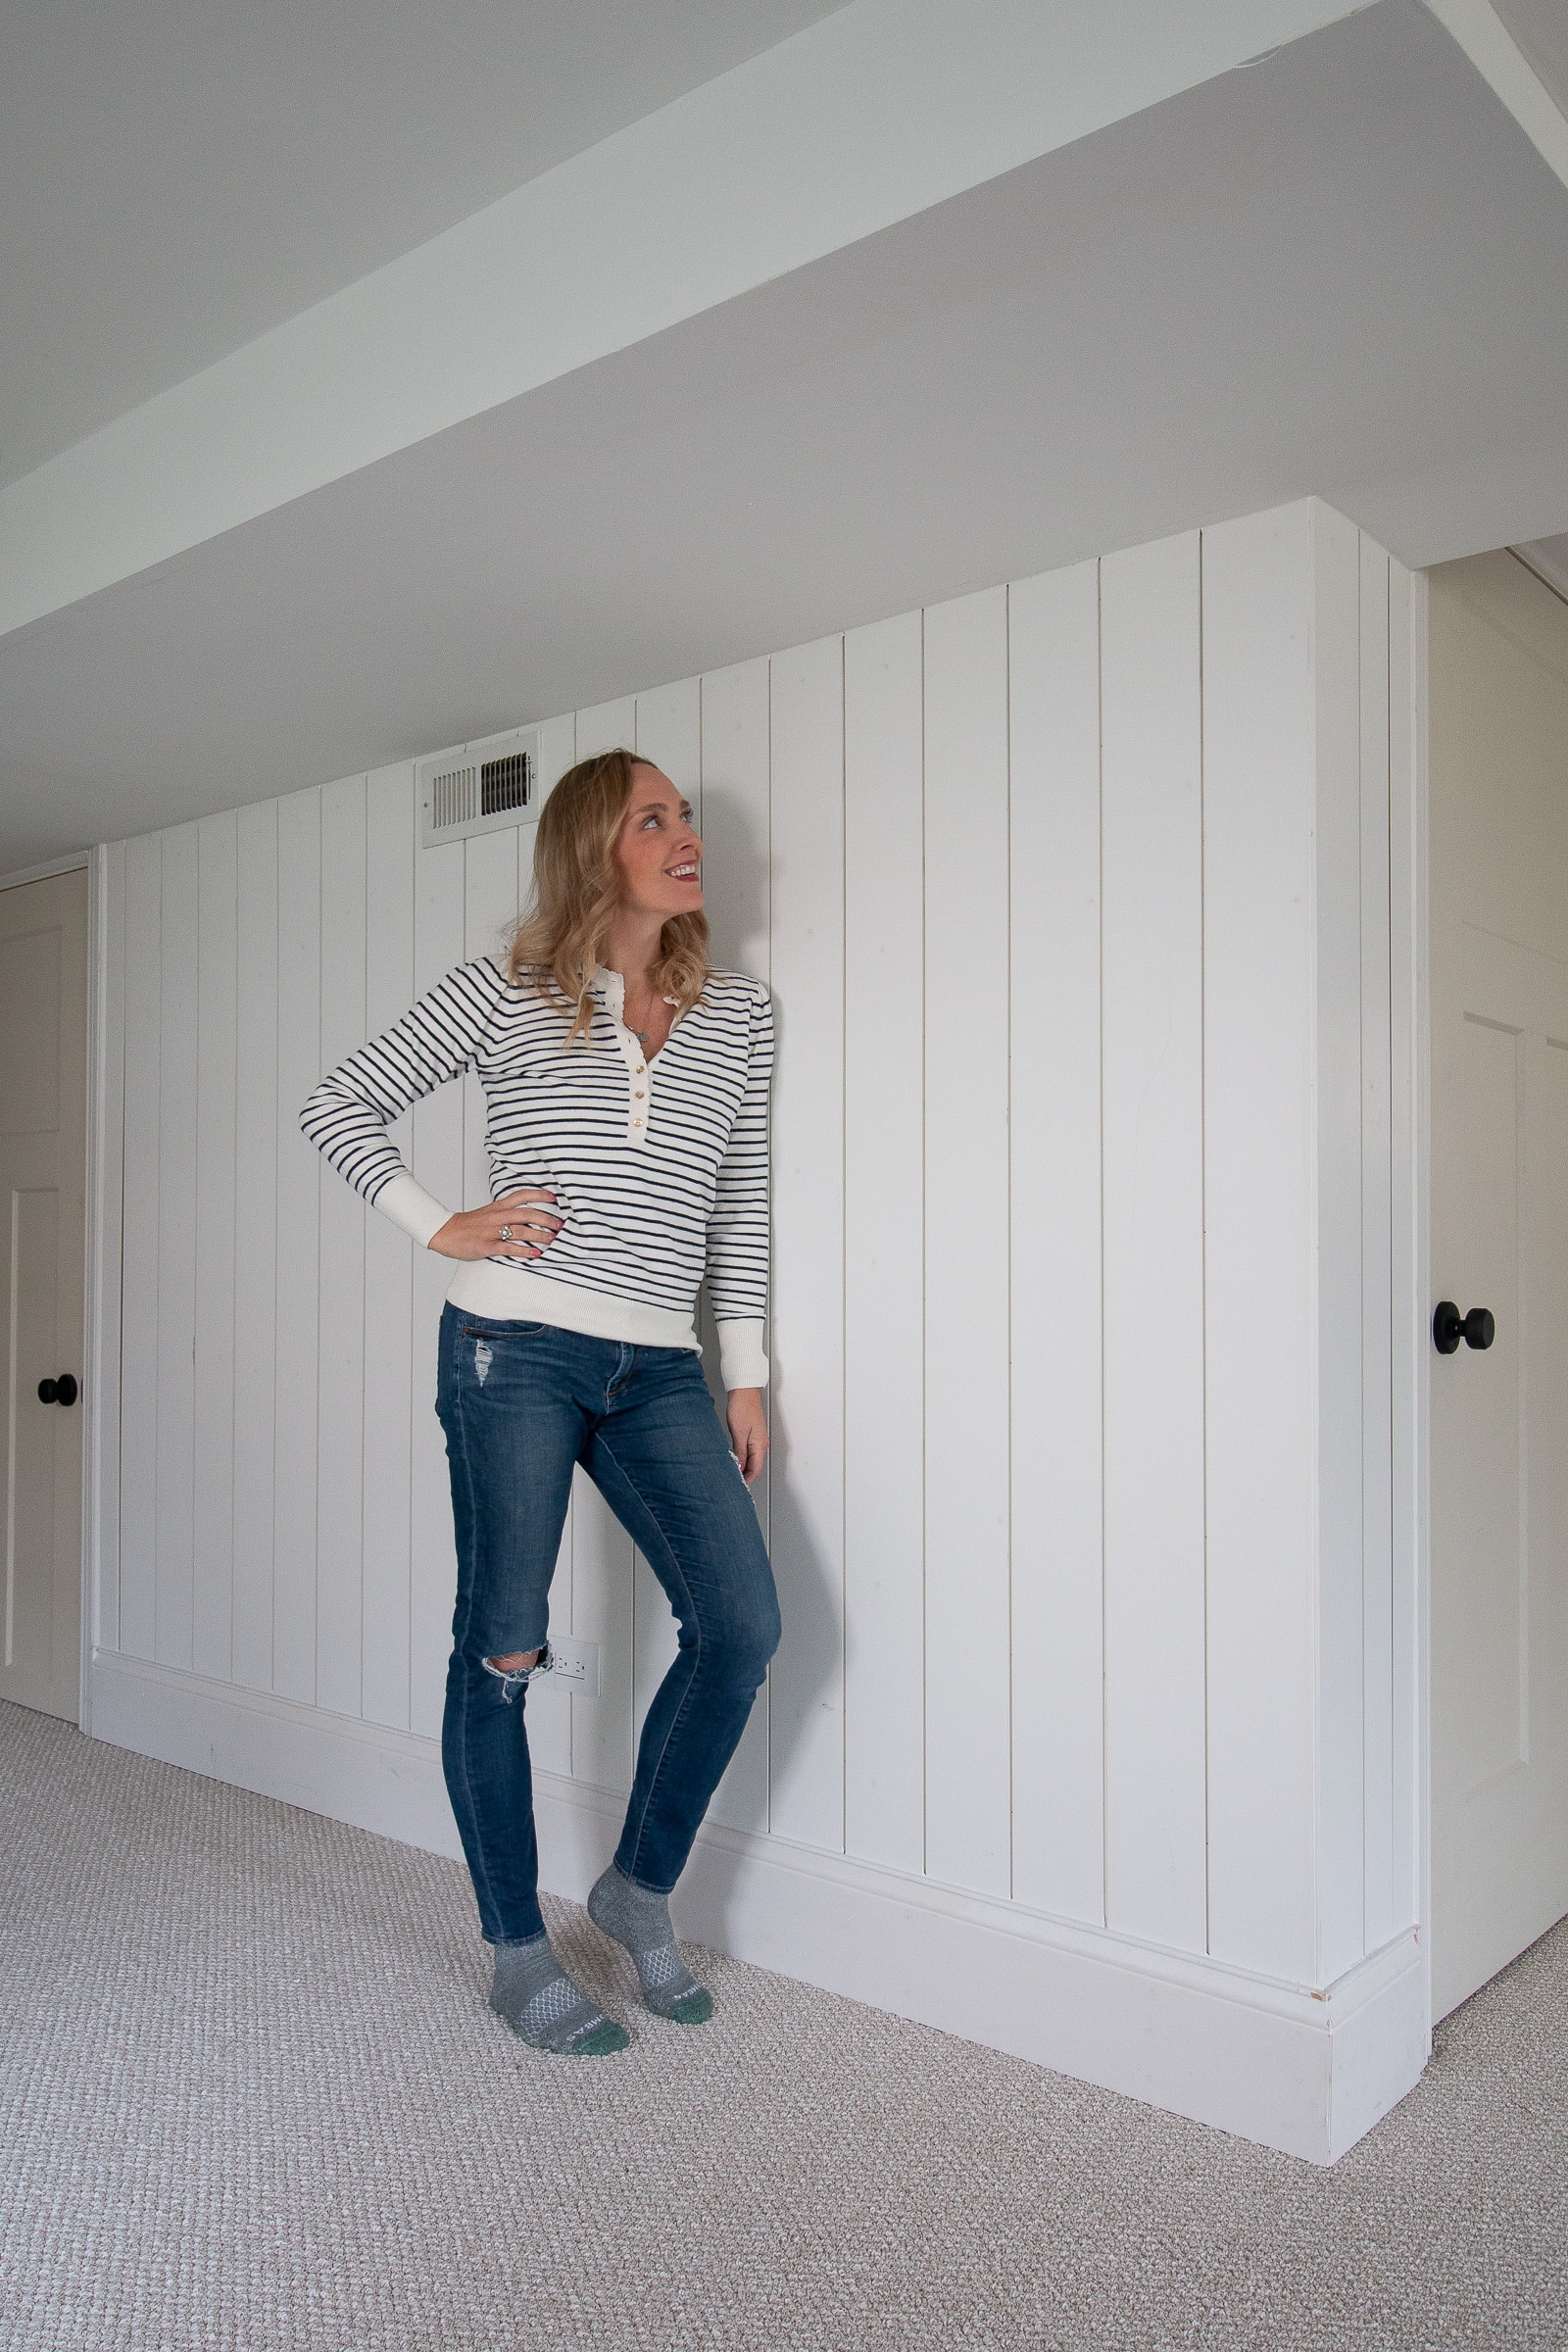 How to install vertical shiplap